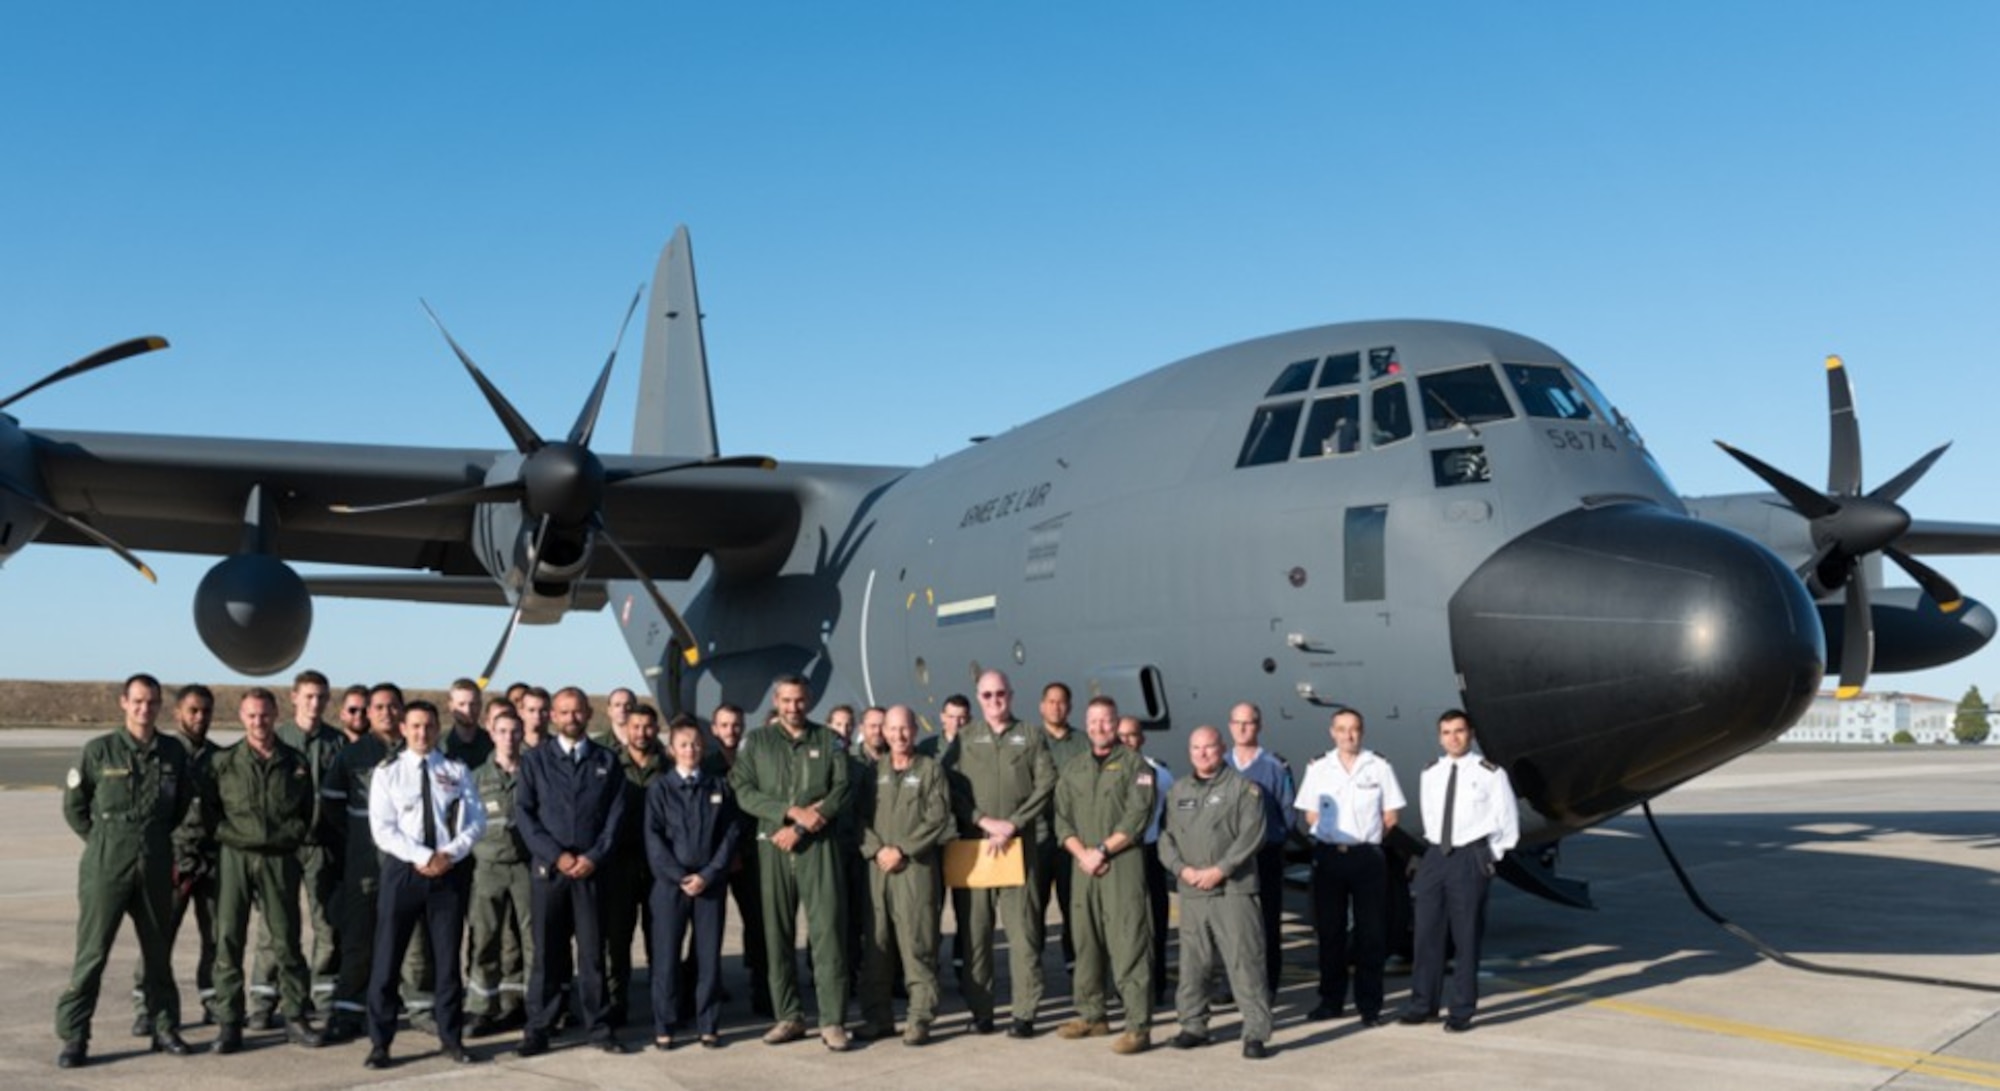 A group of Airmen from the Air Force Air Mobility Command and French Air Force pause for a photo in front of a KC-130J aircraft that was delivered to Évreux-Fauville Air Base, France Sept. 17, 2019. (Courtesy photo)